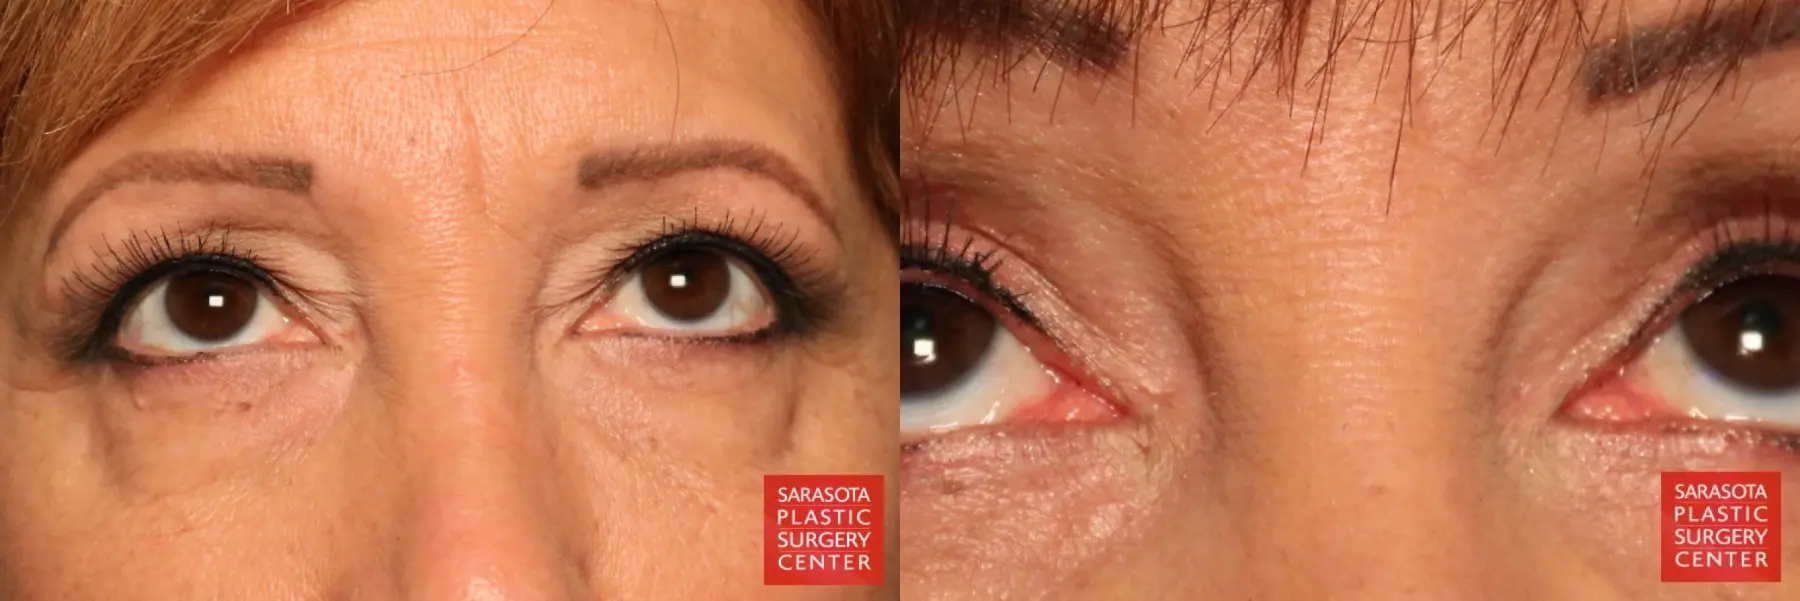 Eyelid Lift: Patient 9 - Before and After 3